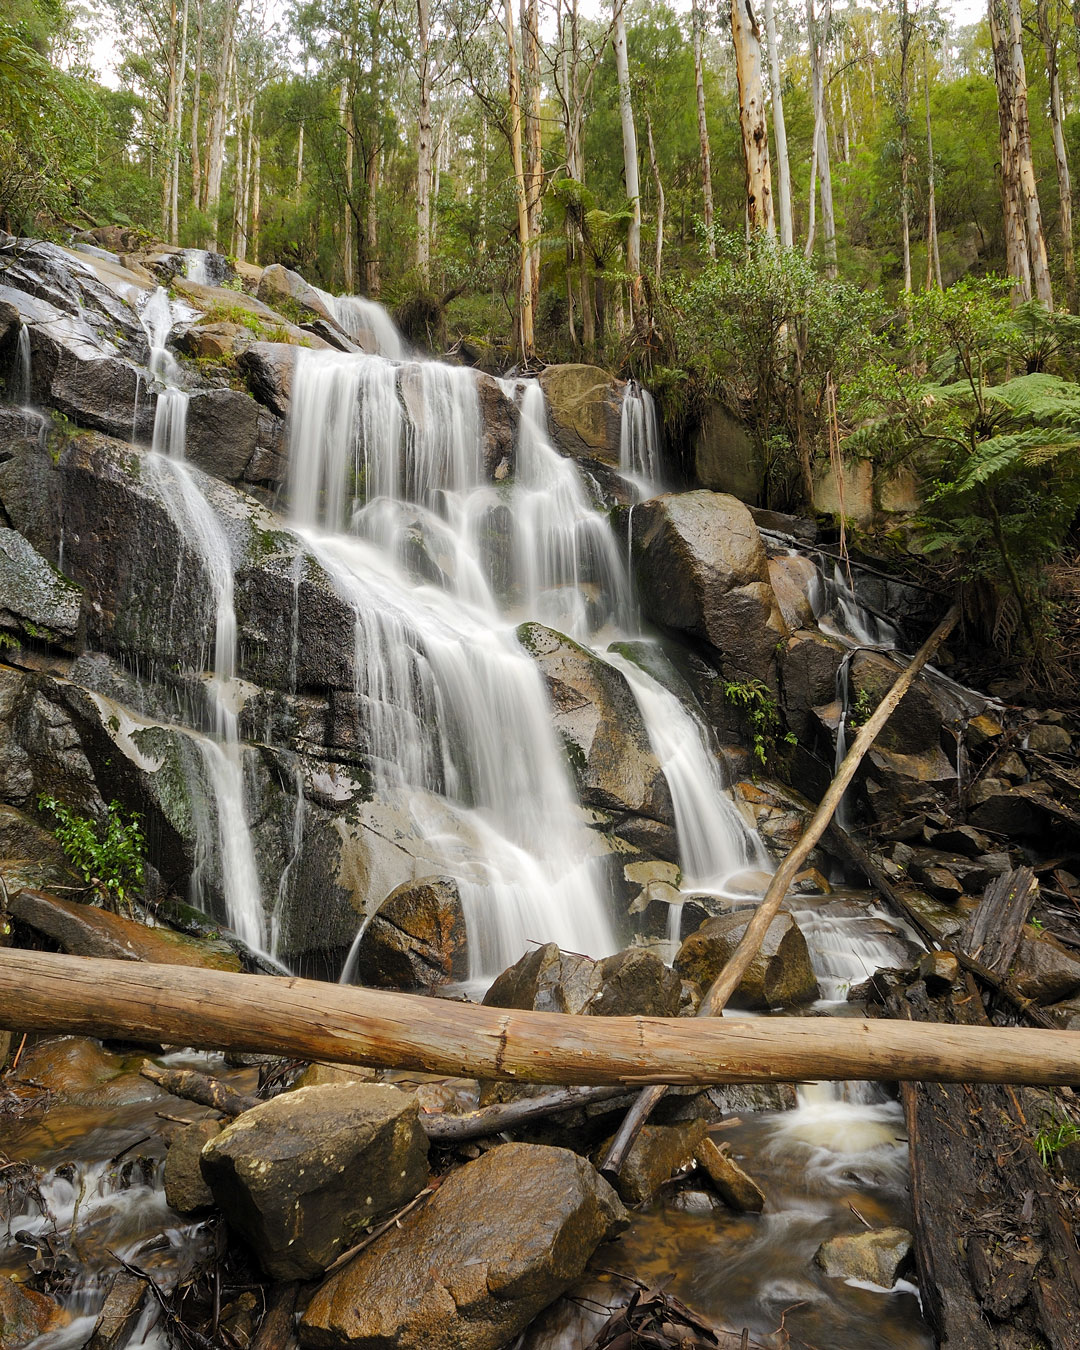 Water cascading over Toorongo Falls in West Gippsland, Victoria.